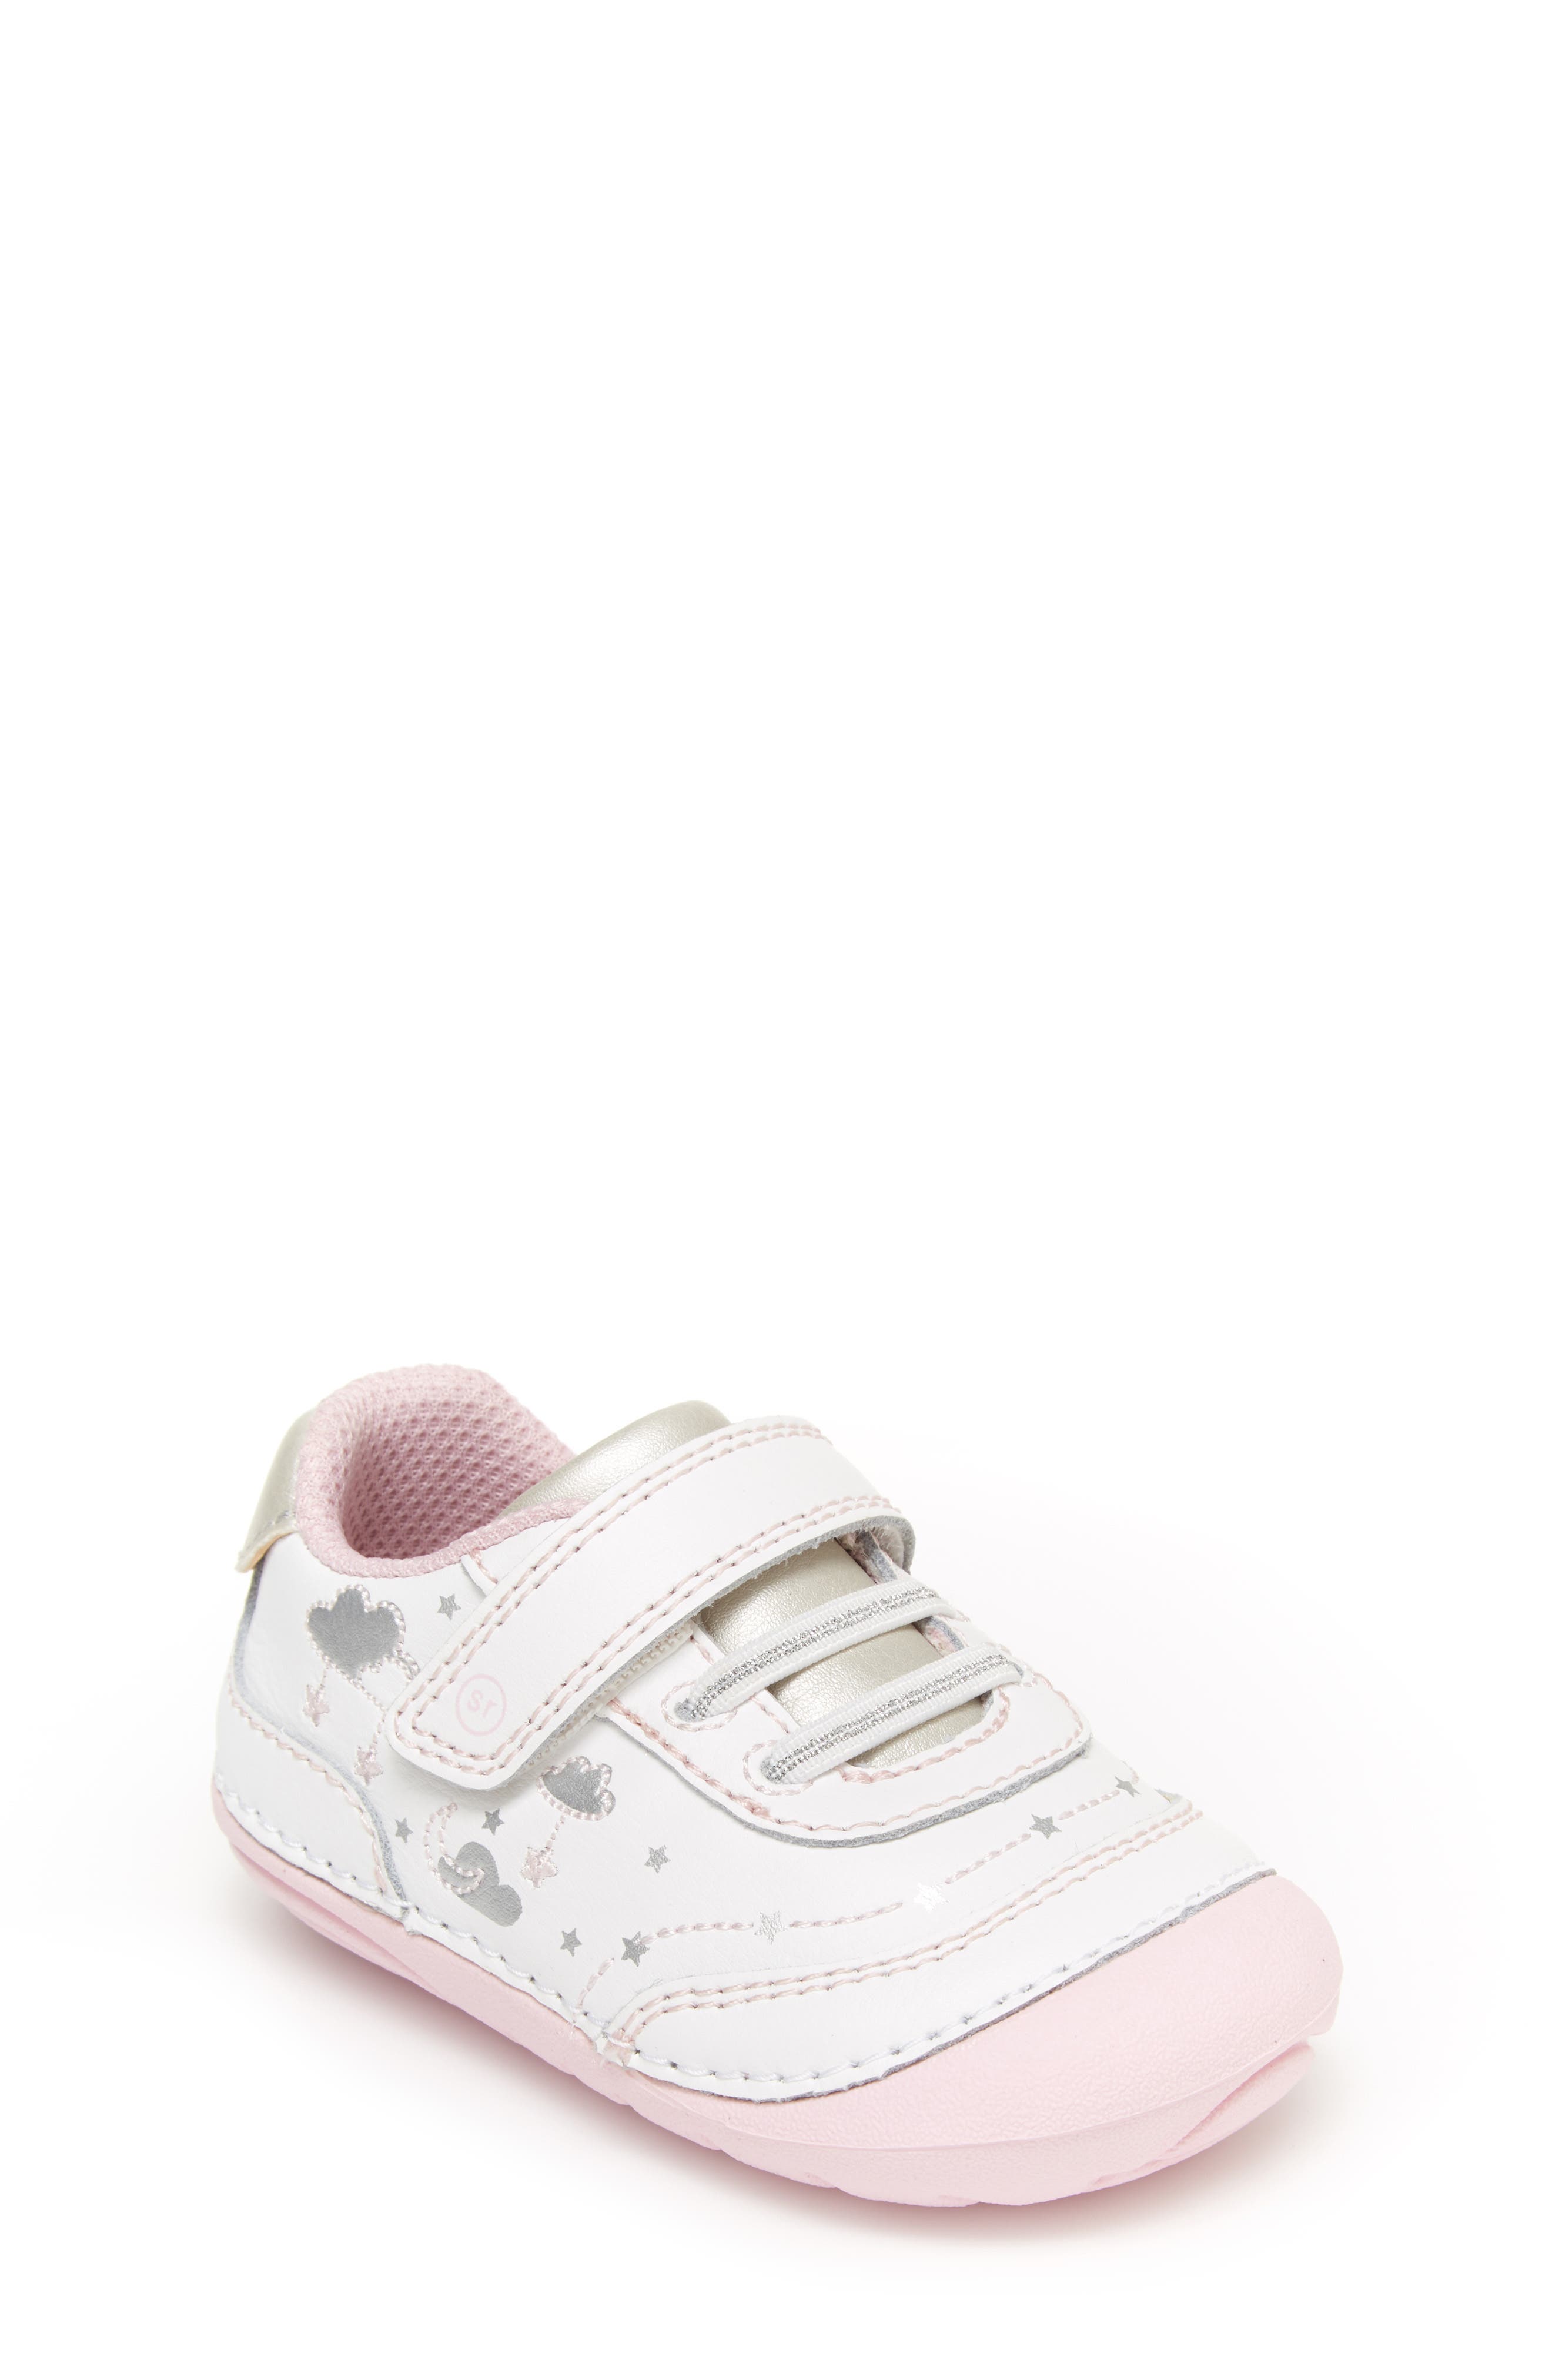 baby girl first shoes